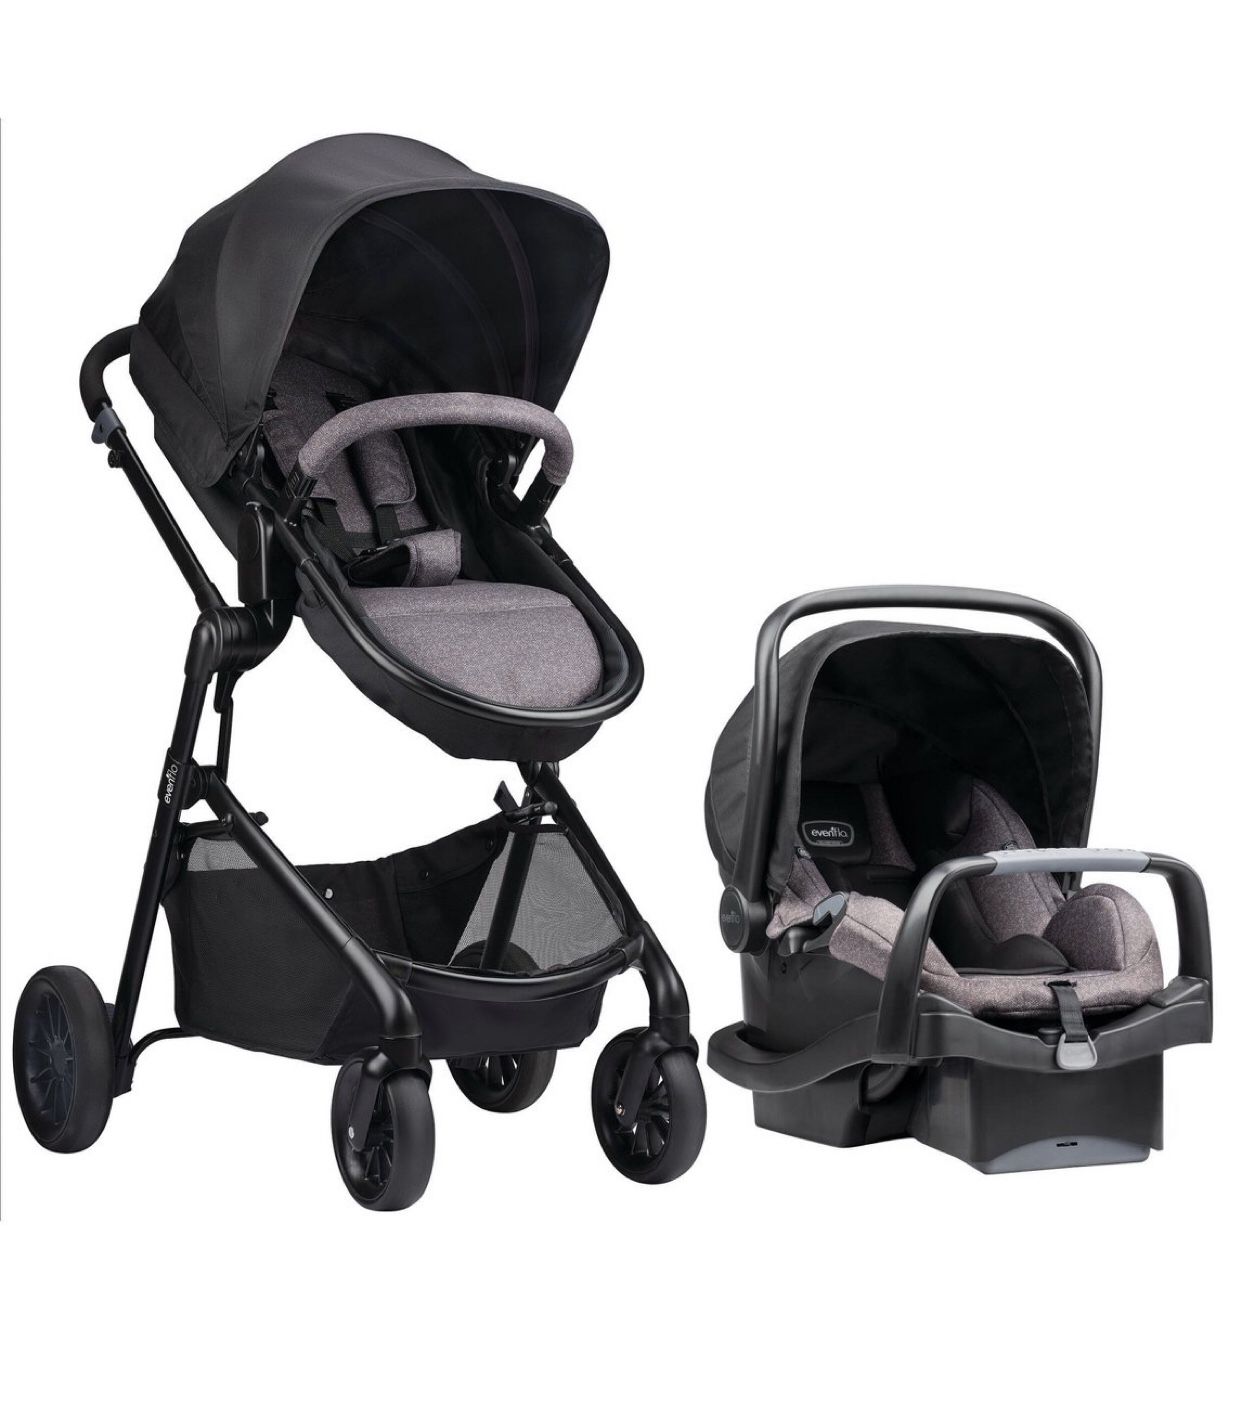 Evenflo Travel System Stroller with Car seat